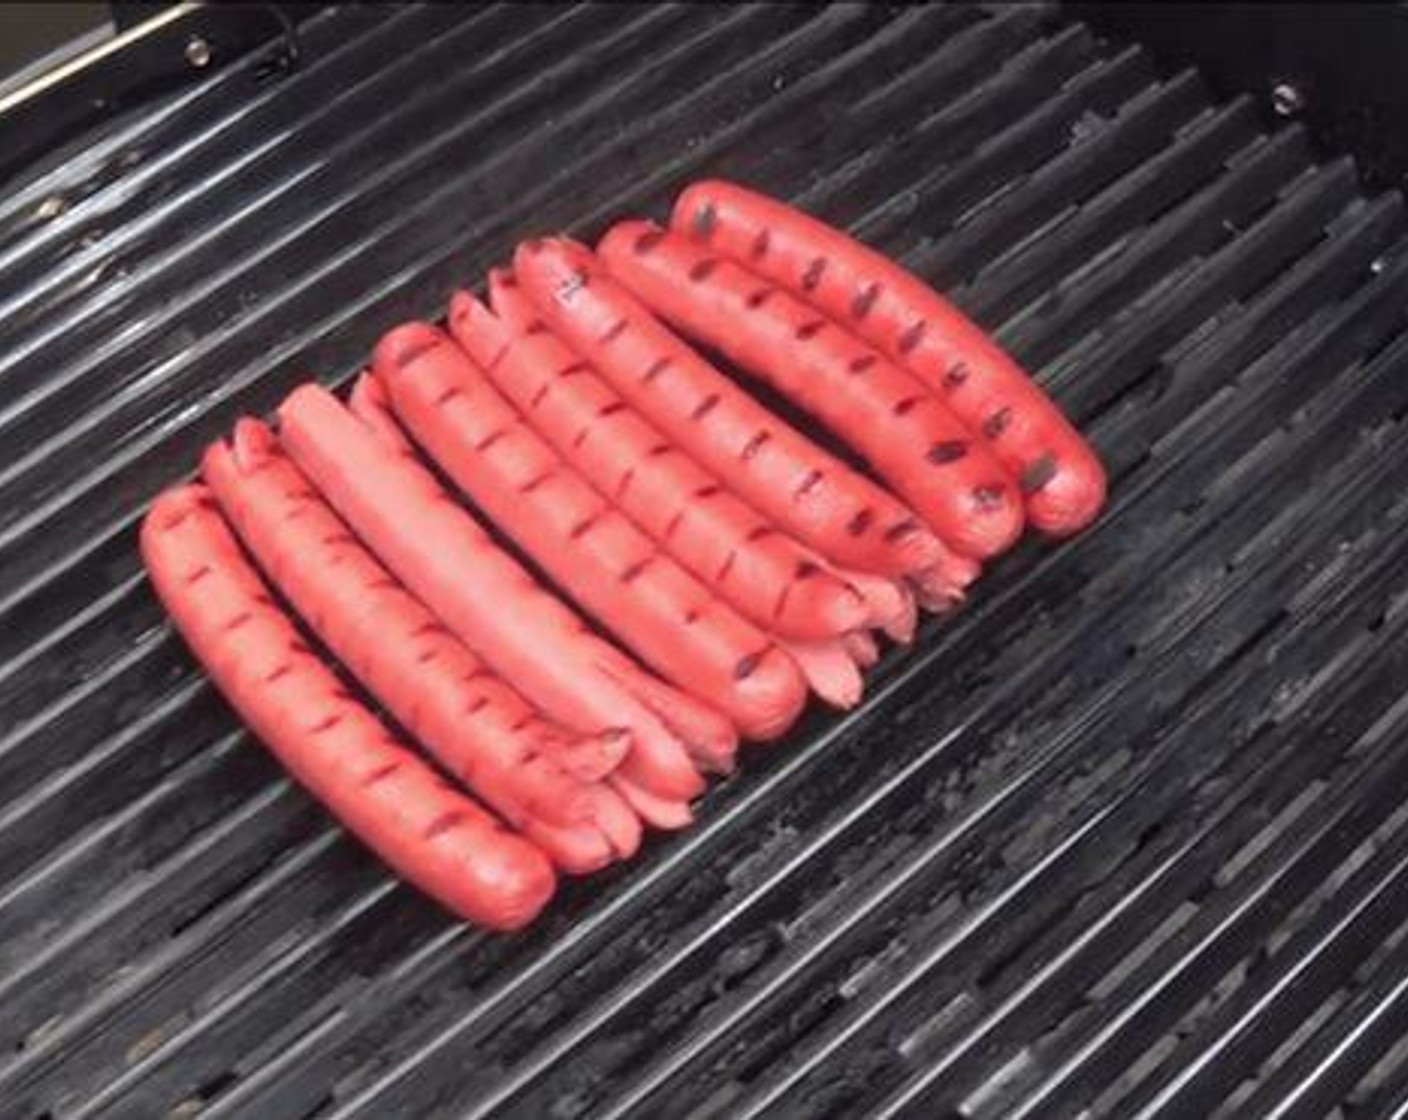 step 1 On a hot grill place your Hot Dogs (6) on for 5 minutes. When they have great grill marks on the hot dogs you can pull them off.